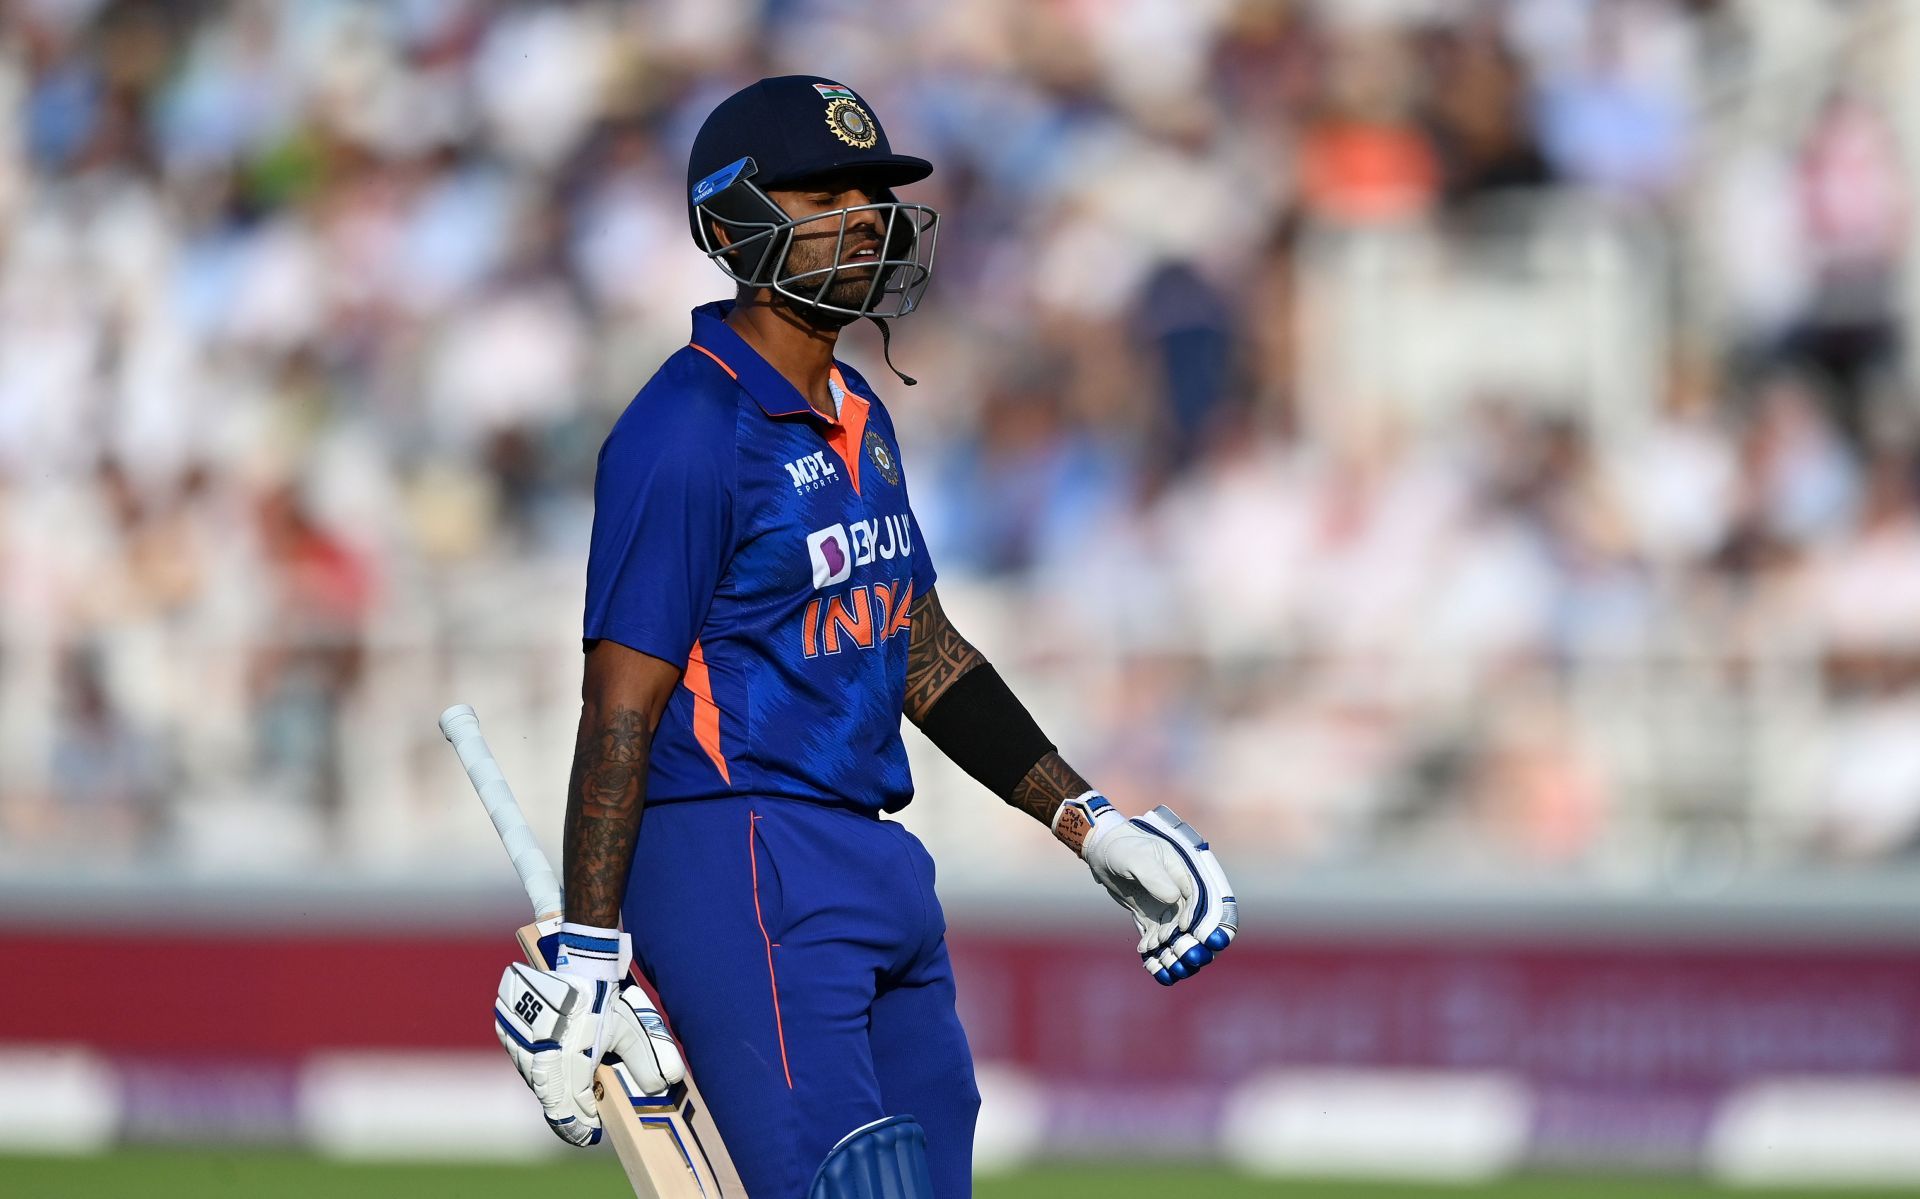 Suryakumar Yadav scored a hundred in a T20I against England this year. (Image: Getty)